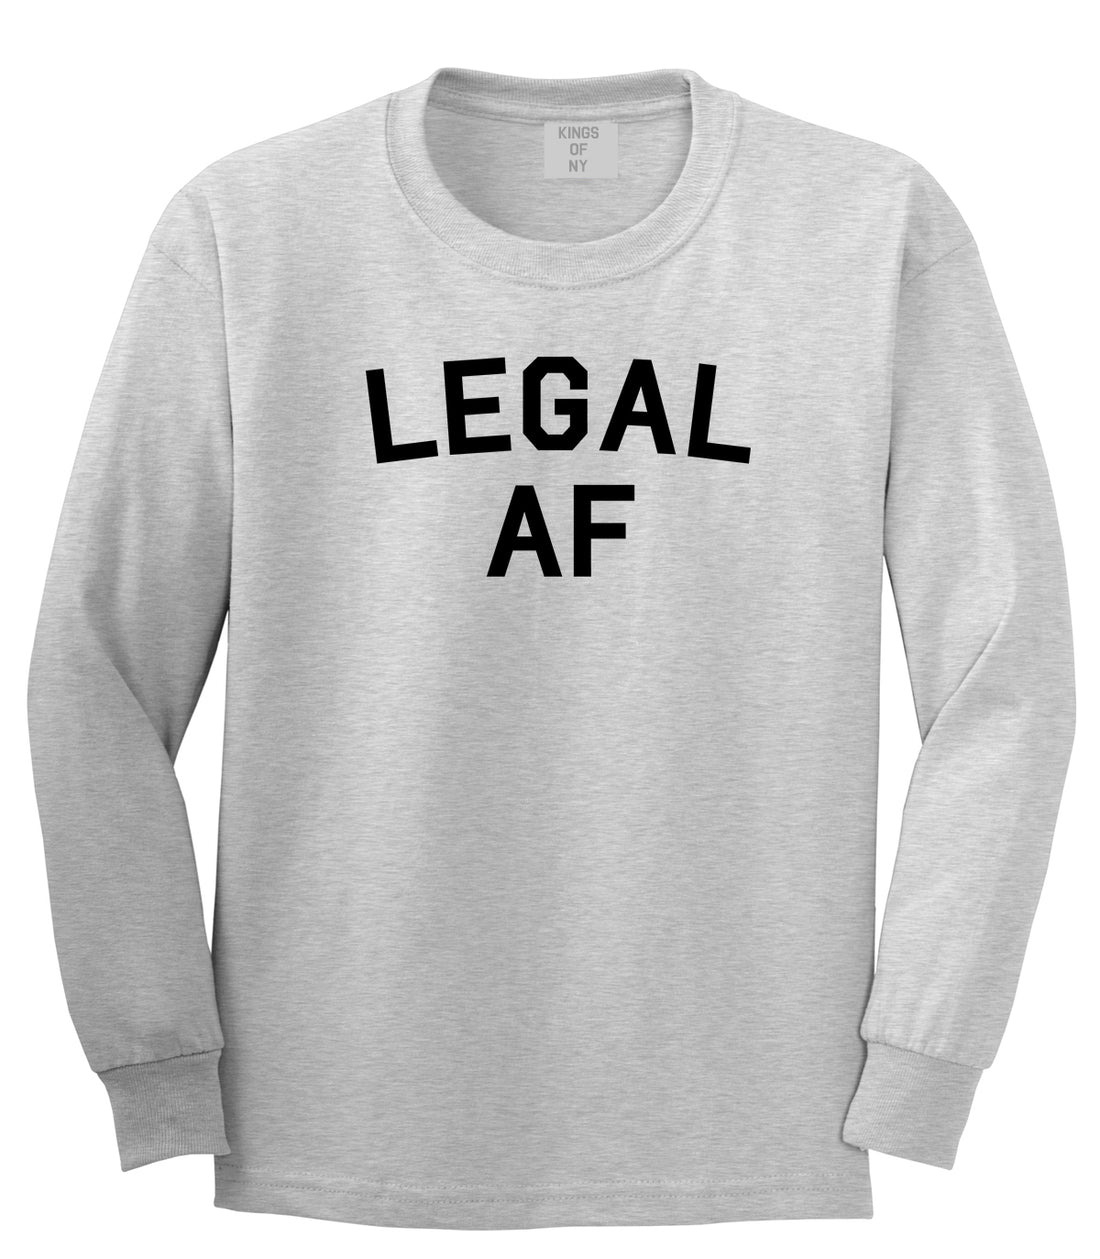 Legal AF 21st Birthday Mens Long Sleeve T-Shirt Grey by Kings Of NY